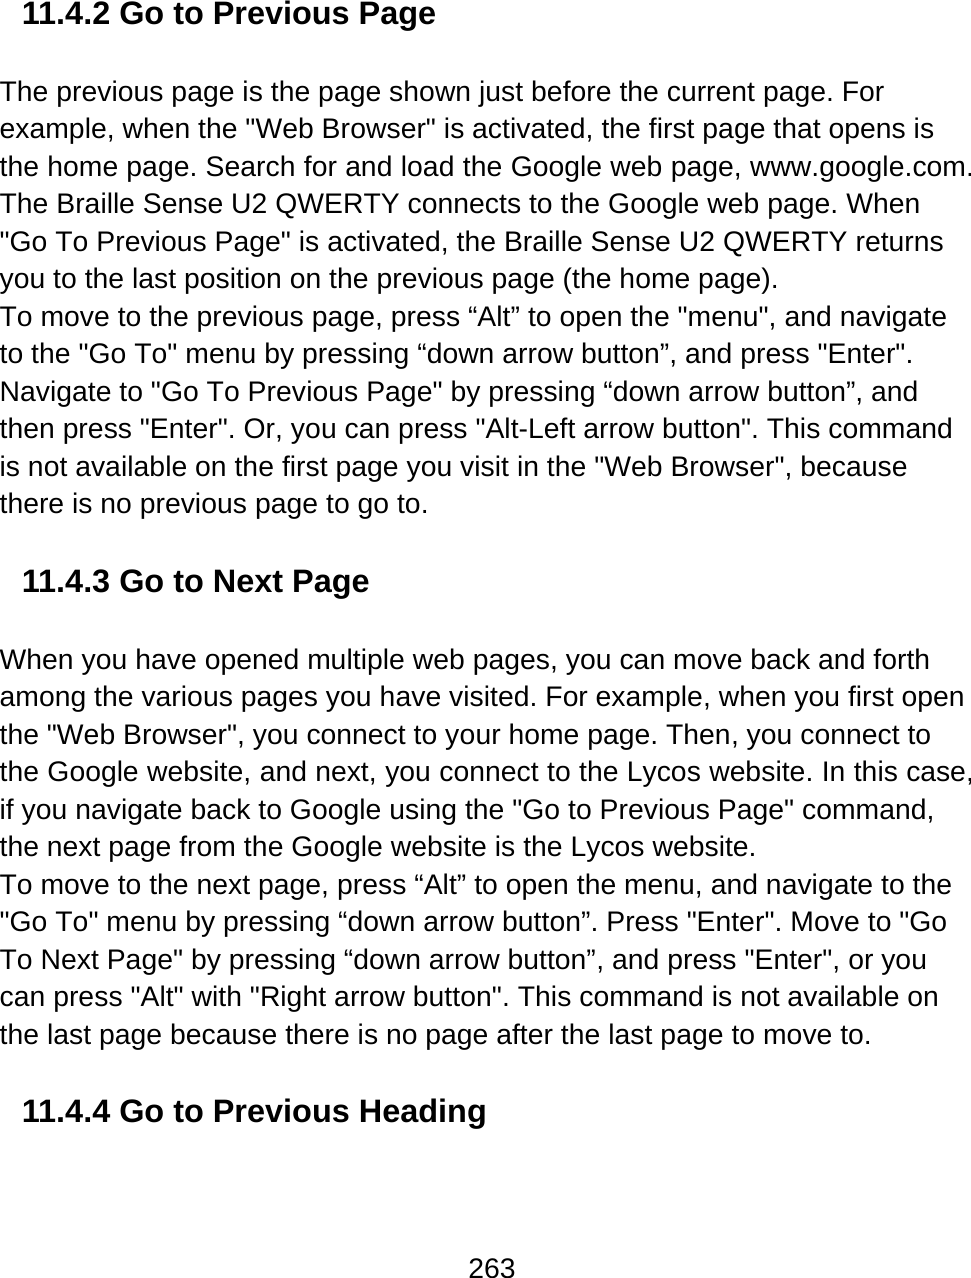 263   11.4.2 Go to Previous Page   The previous page is the page shown just before the current page. For example, when the &quot;Web Browser&quot; is activated, the first page that opens is the home page. Search for and load the Google web page, www.google.com. The Braille Sense U2 QWERTY connects to the Google web page. When &quot;Go To Previous Page&quot; is activated, the Braille Sense U2 QWERTY returns you to the last position on the previous page (the home page).  To move to the previous page, press “Alt” to open the &quot;menu&quot;, and navigate to the &quot;Go To&quot; menu by pressing “down arrow button”, and press &quot;Enter&quot;. Navigate to &quot;Go To Previous Page&quot; by pressing “down arrow button”, and then press &quot;Enter&quot;. Or, you can press &quot;Alt-Left arrow button&quot;. This command is not available on the first page you visit in the &quot;Web Browser&quot;, because there is no previous page to go to.  11.4.3 Go to Next Page  When you have opened multiple web pages, you can move back and forth among the various pages you have visited. For example, when you first open the &quot;Web Browser&quot;, you connect to your home page. Then, you connect to the Google website, and next, you connect to the Lycos website. In this case, if you navigate back to Google using the &quot;Go to Previous Page&quot; command, the next page from the Google website is the Lycos website.  To move to the next page, press “Alt” to open the menu, and navigate to the &quot;Go To&quot; menu by pressing “down arrow button”. Press &quot;Enter&quot;. Move to &quot;Go To Next Page&quot; by pressing “down arrow button”, and press &quot;Enter&quot;, or you can press &quot;Alt&quot; with &quot;Right arrow button&quot;. This command is not available on the last page because there is no page after the last page to move to.  11.4.4 Go to Previous Heading  